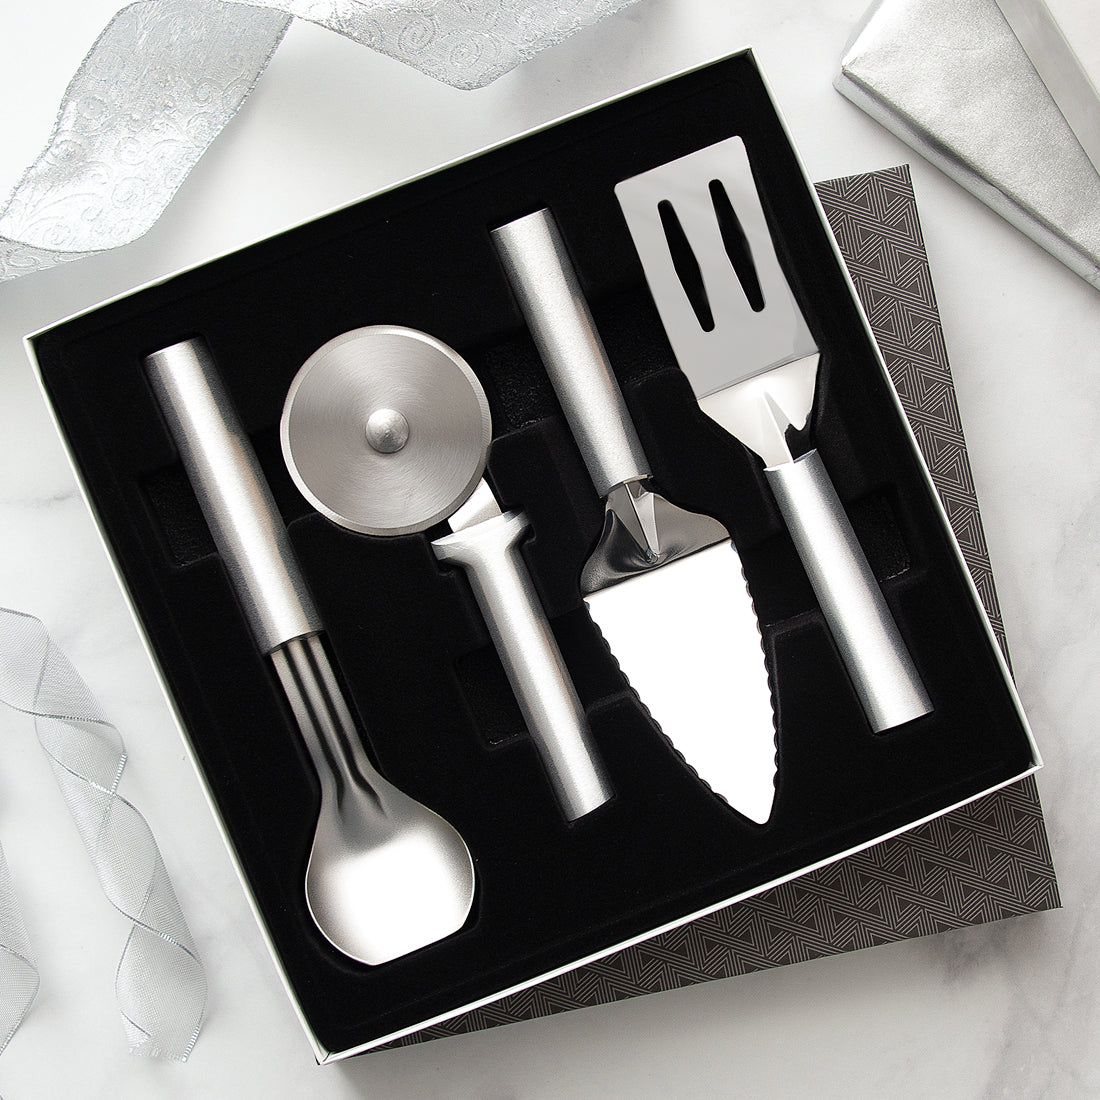 Rada Cutlery Ultimate Utensil Gift Set with silver handles in a black-lined gift box